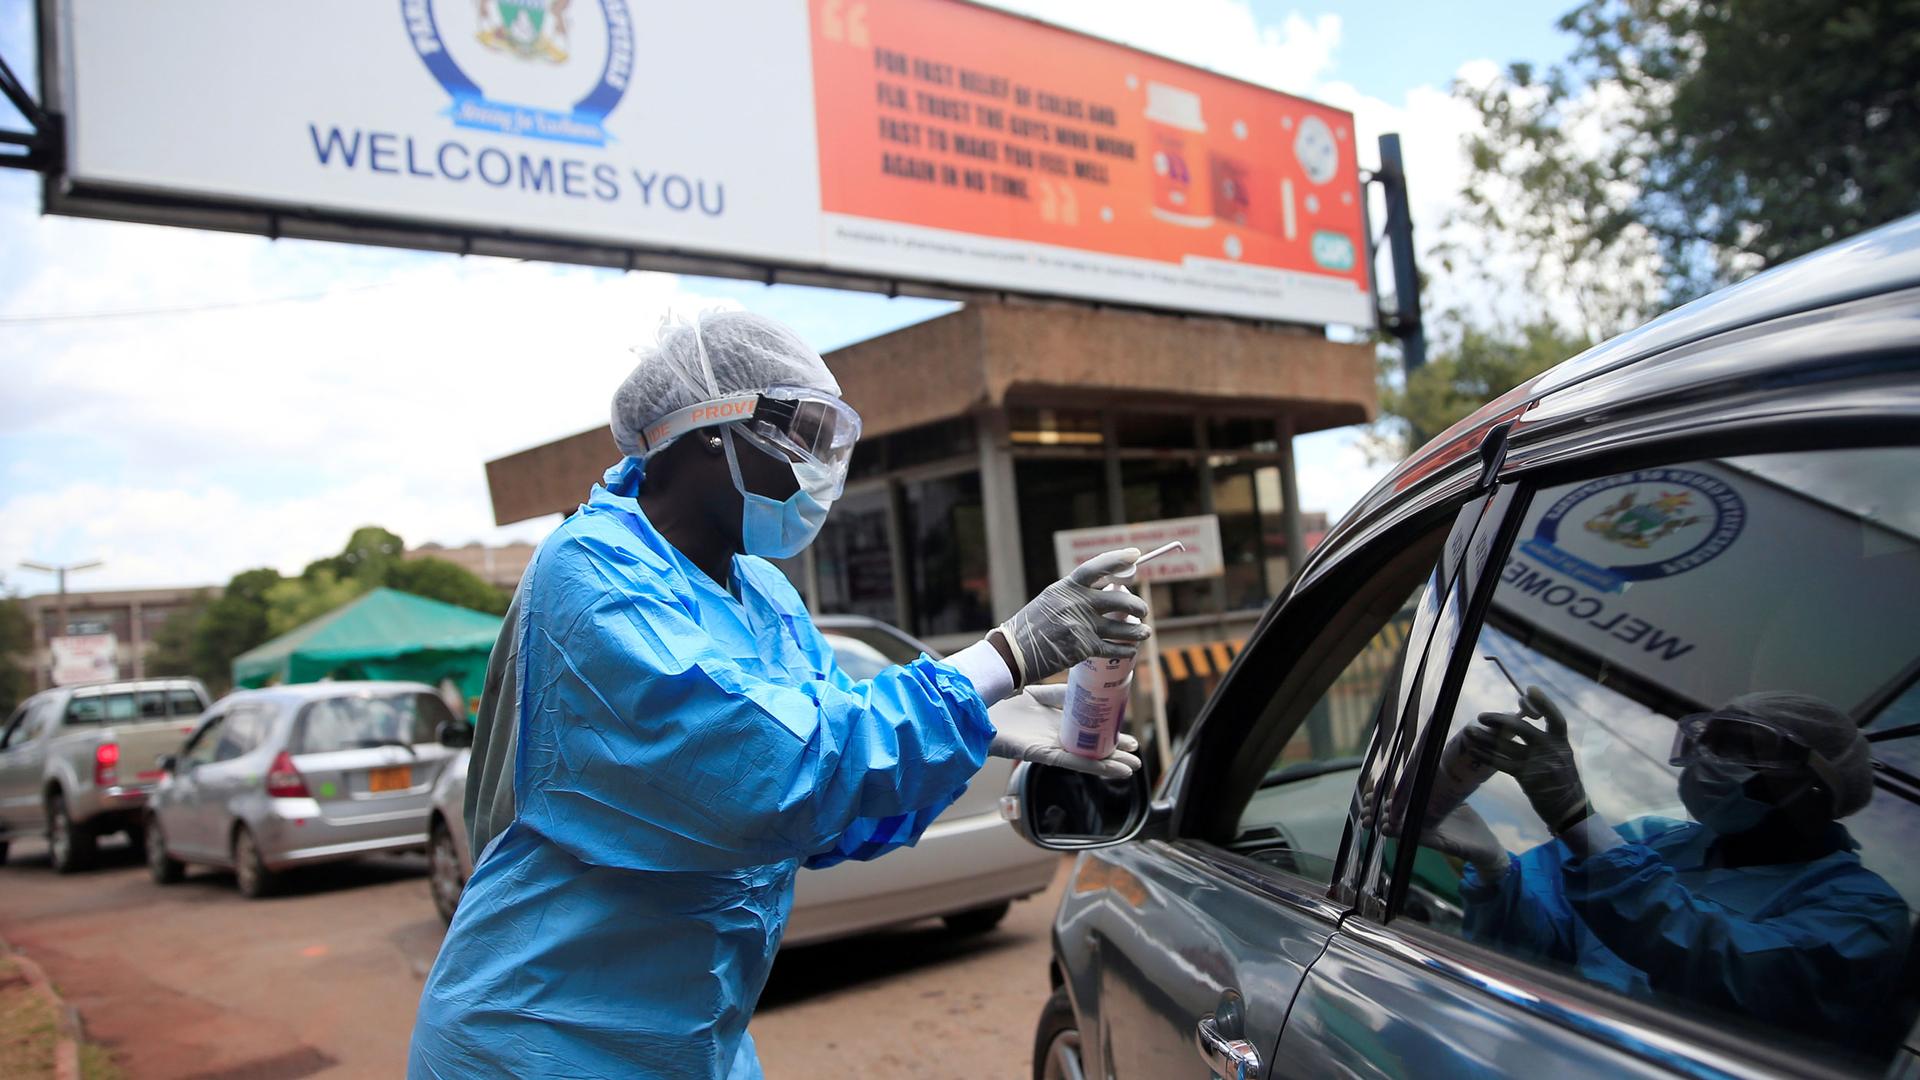 A health worker screens and sanitises visitors to prevent the spread of coronavirus disease (COVID-19) outside a hospital in Harare, Zimbabwe March 26, 2020.